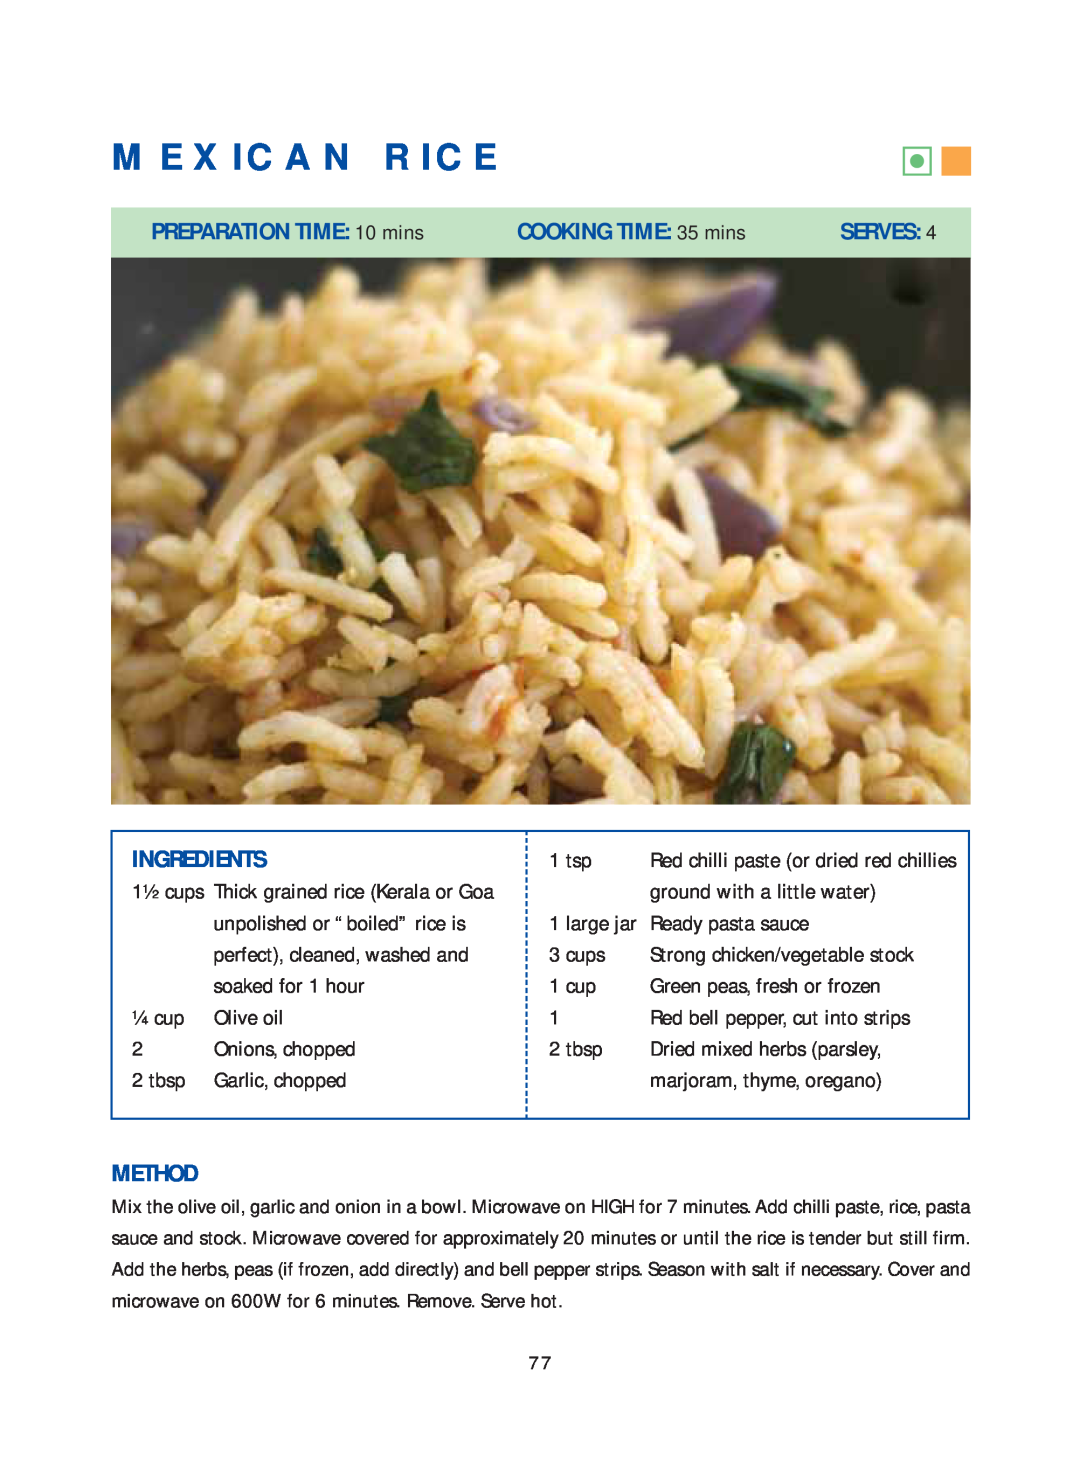 Samsung Microwave Oven warranty Mexican Rice, PREPARATION TIME: 10 mins, COOKING TIME: 35 mins, Serves, Ingredients, Method 